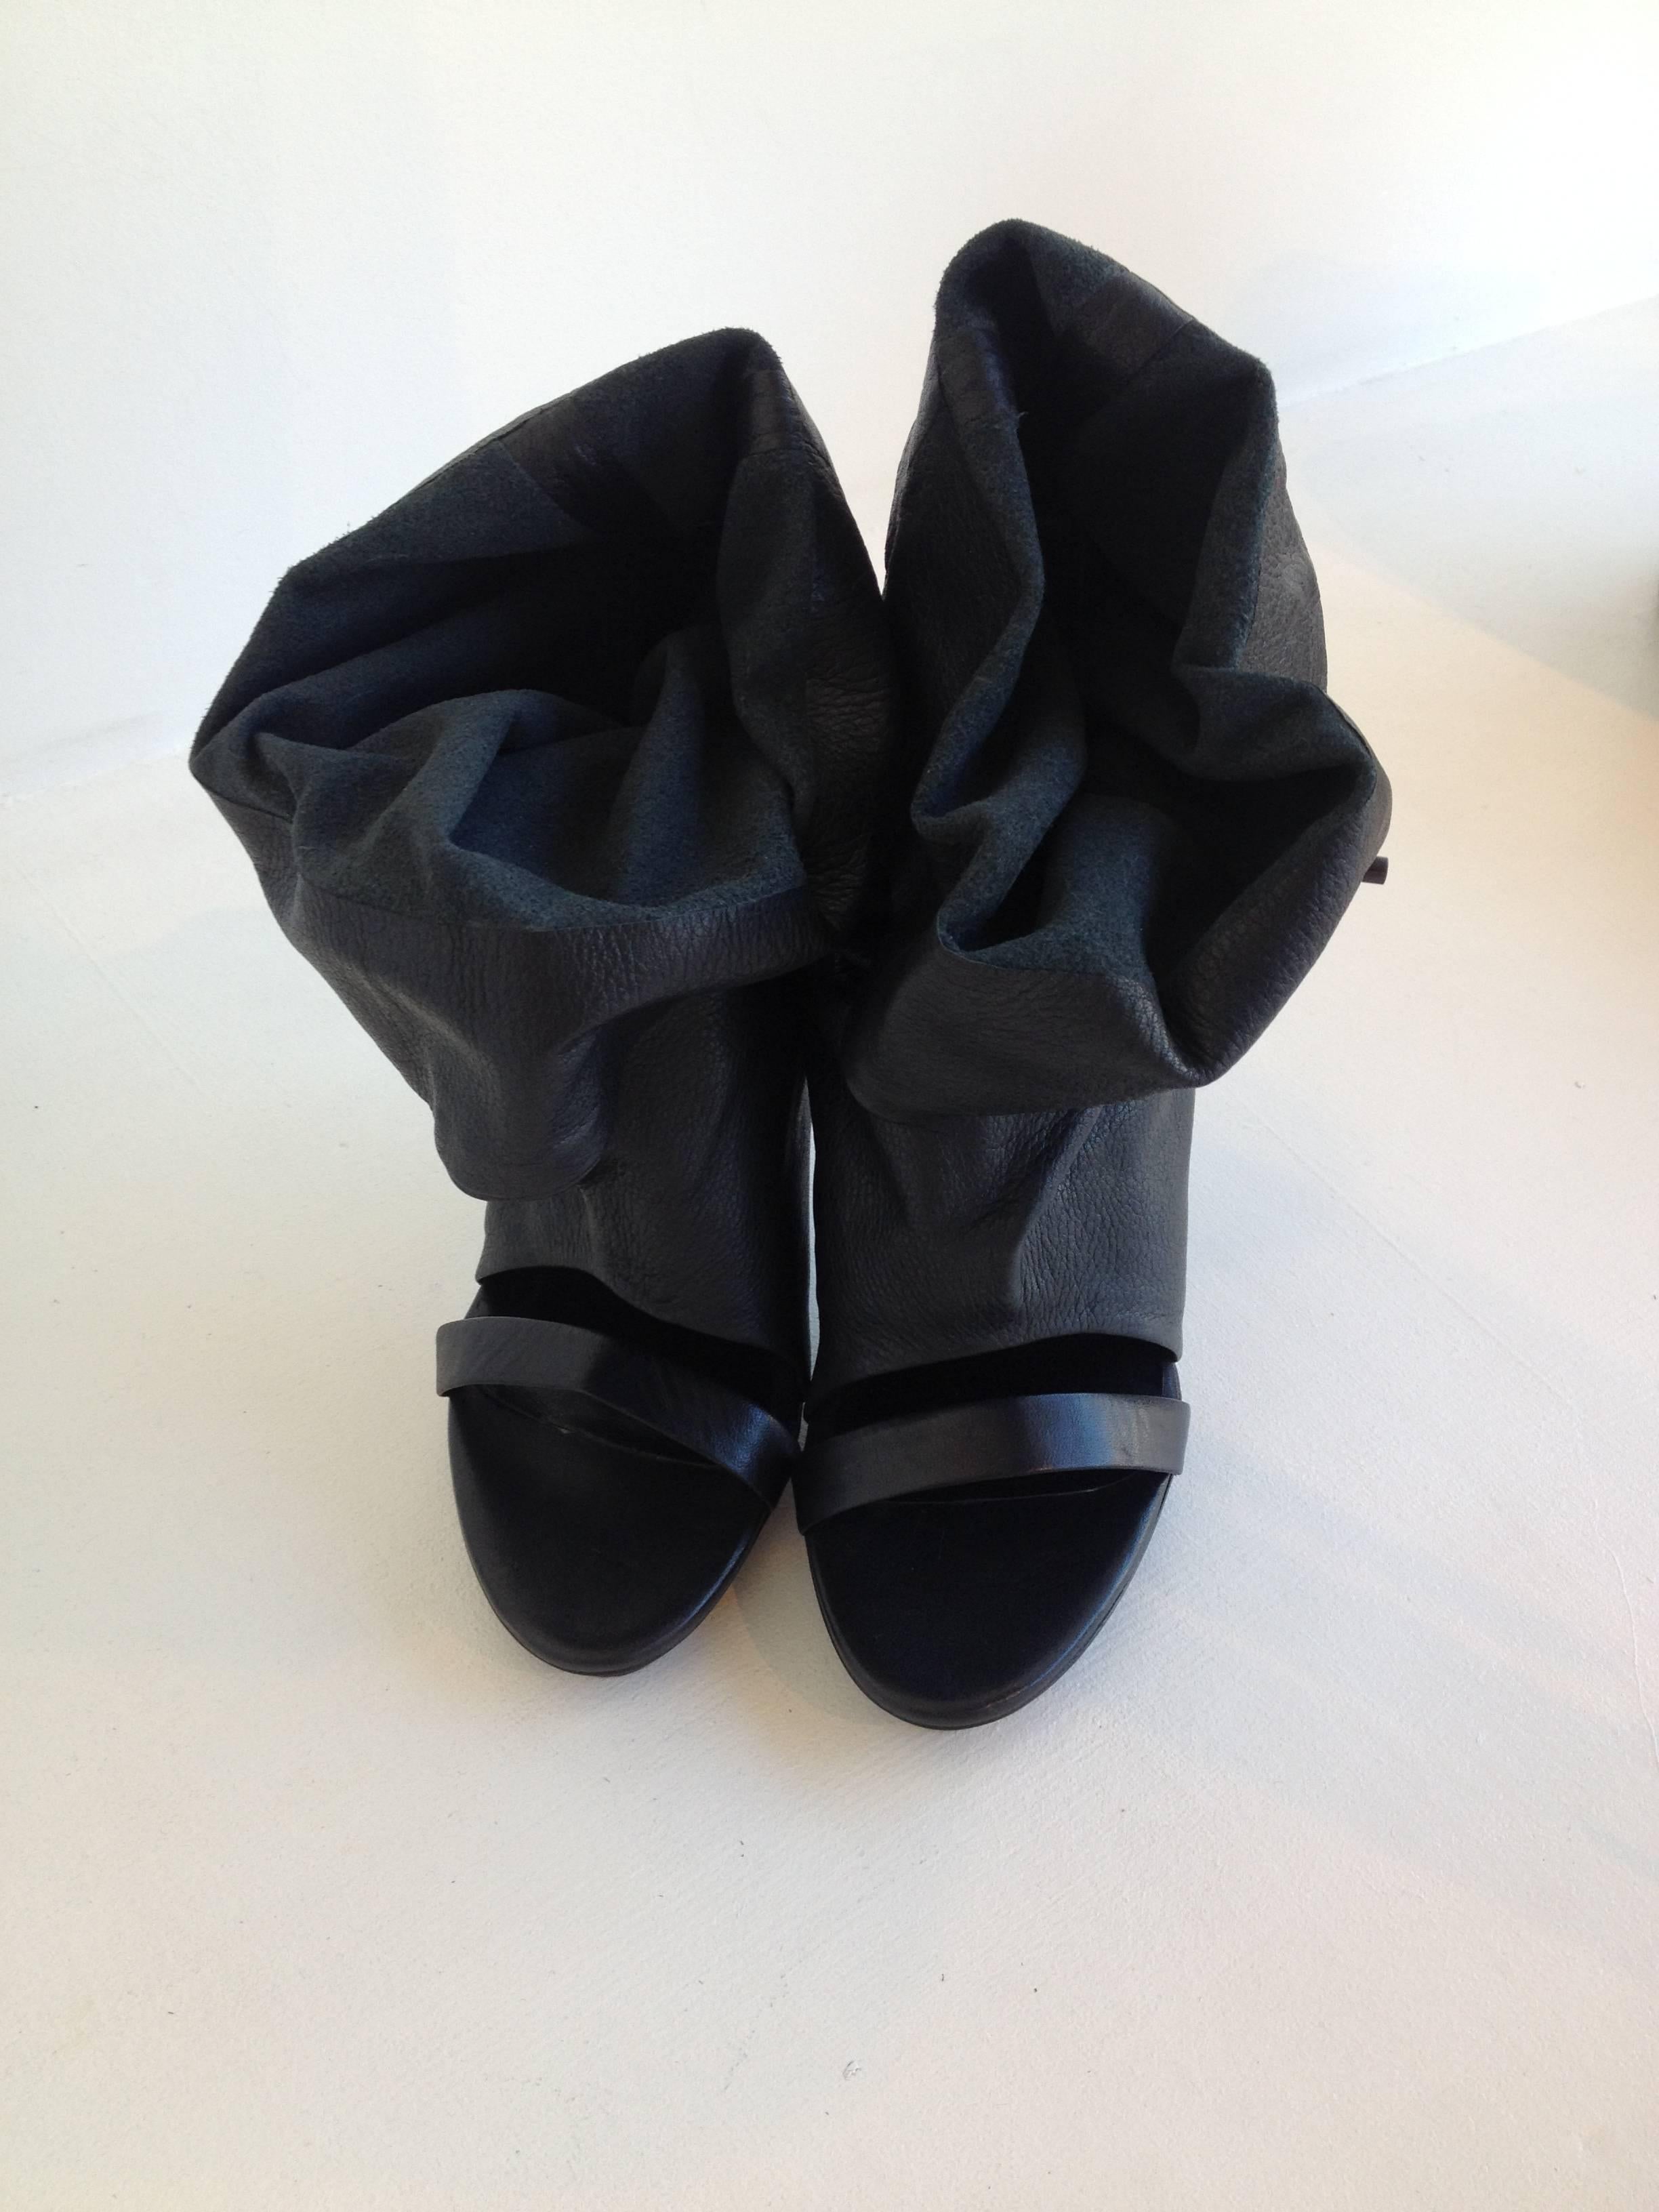 These black Balenciaga booties are a wearable work of art. The soft leather can be tied up or left down, making a statement any way you wear them. With a 4.25 inch heel that's high enough for a night out, and comfortable to walk around in, these are